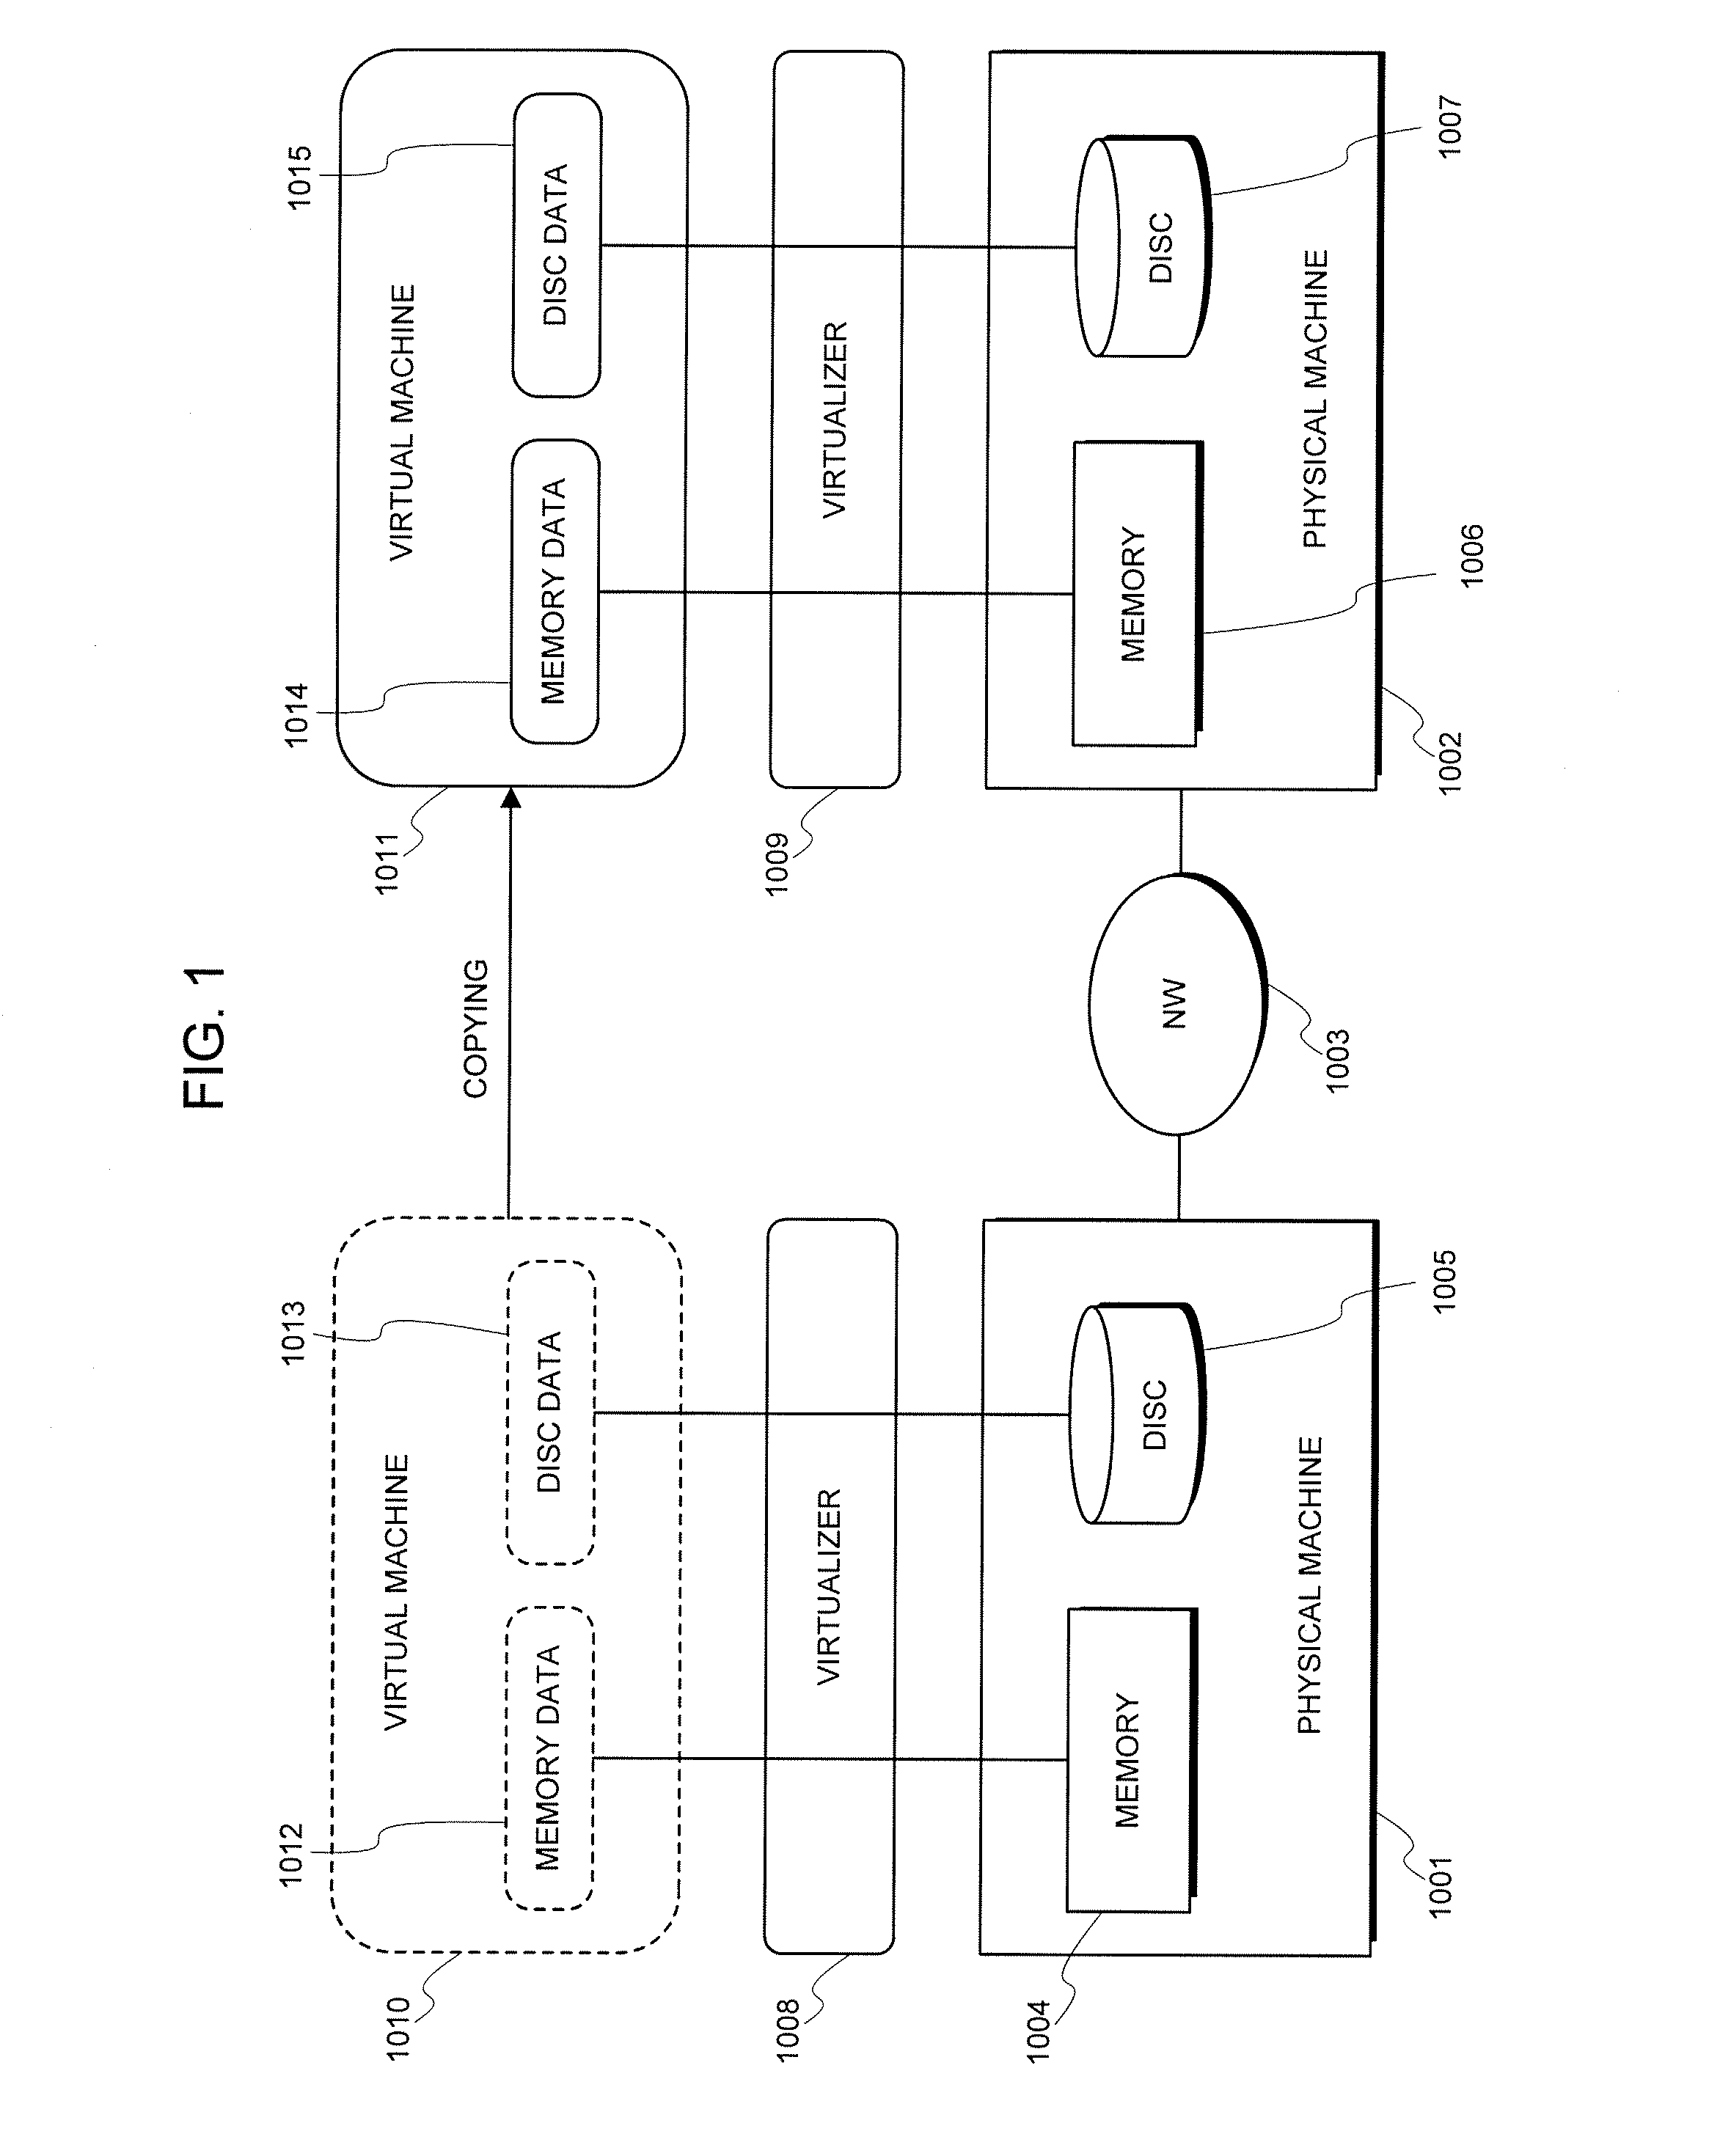 Virtual machine configuration system and method thereof